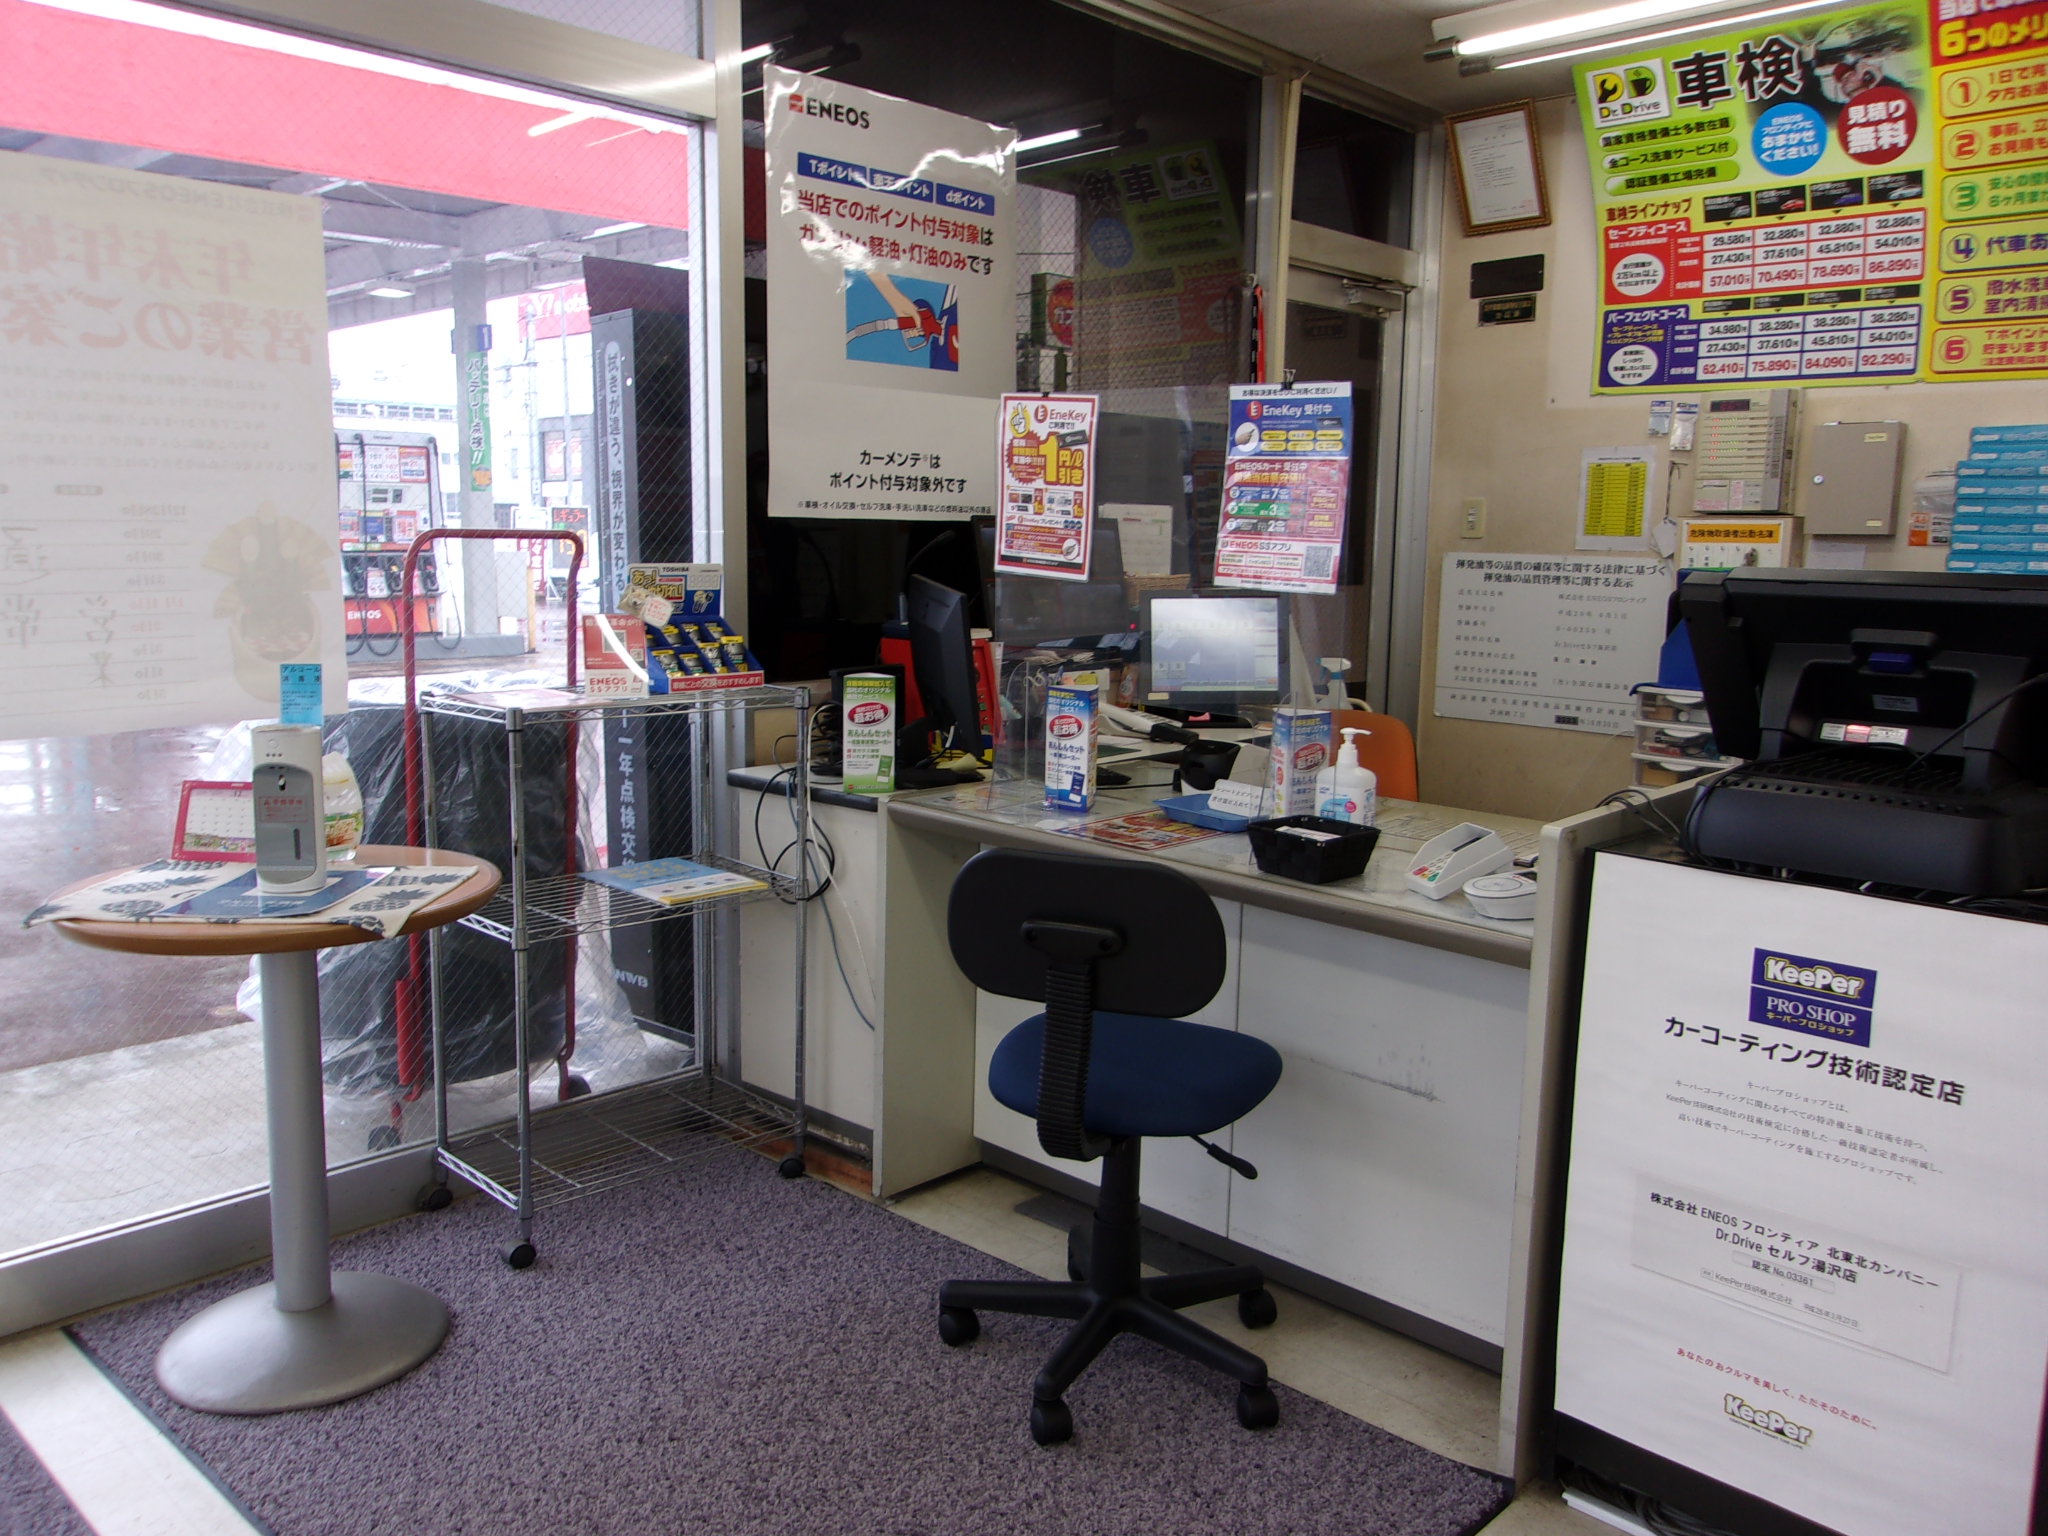 Images ENEOS Dr.Driveセルフ湯沢店(ENEOSフロンティア)